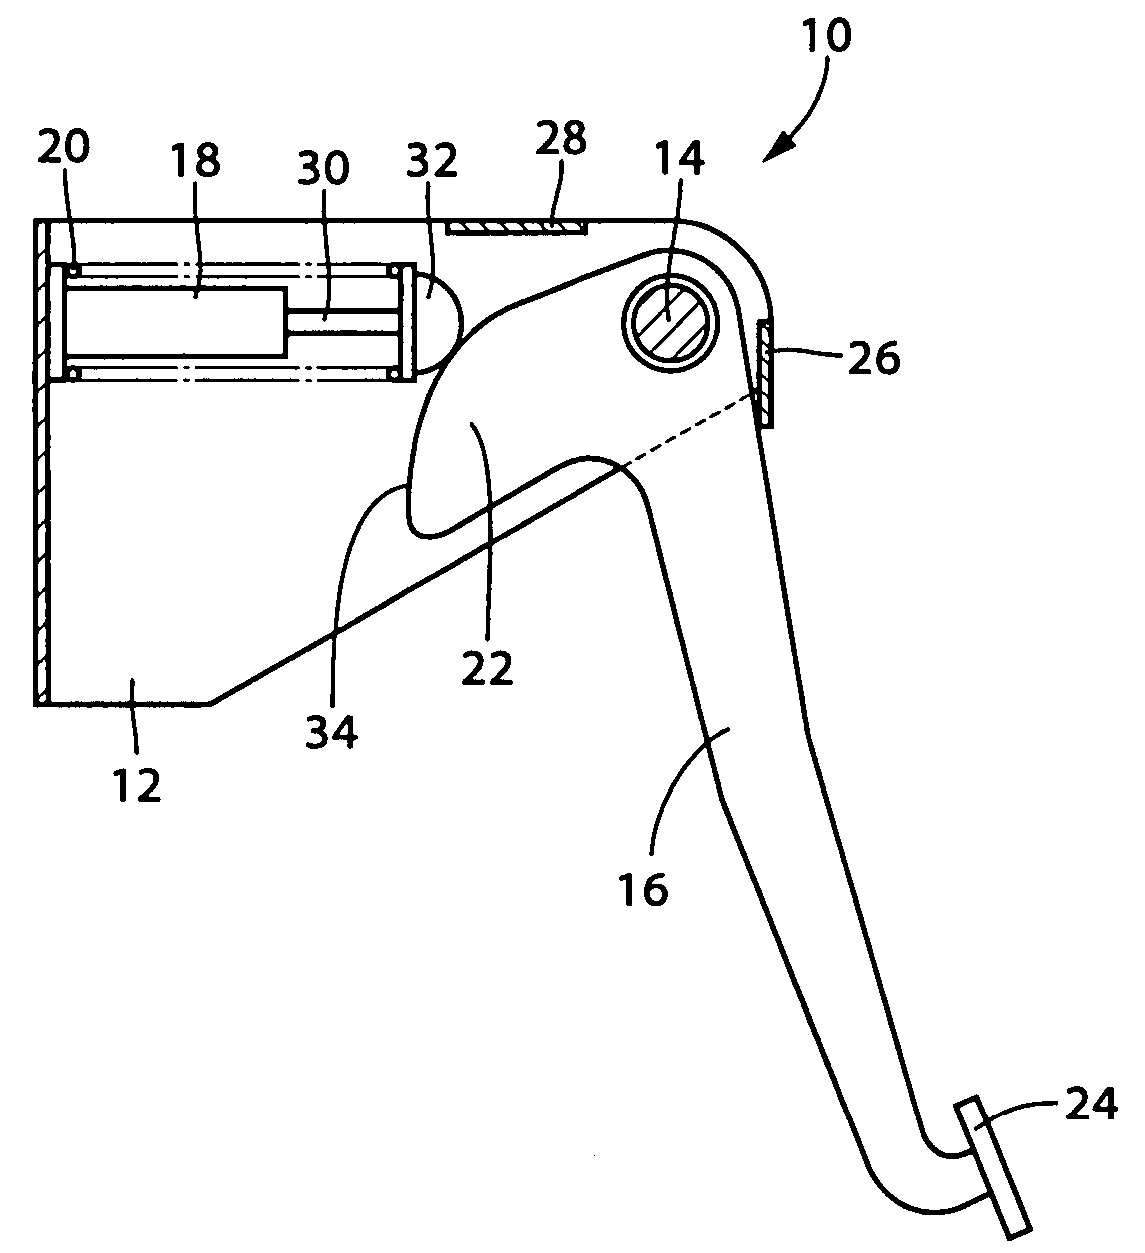 Pedal reaction force device